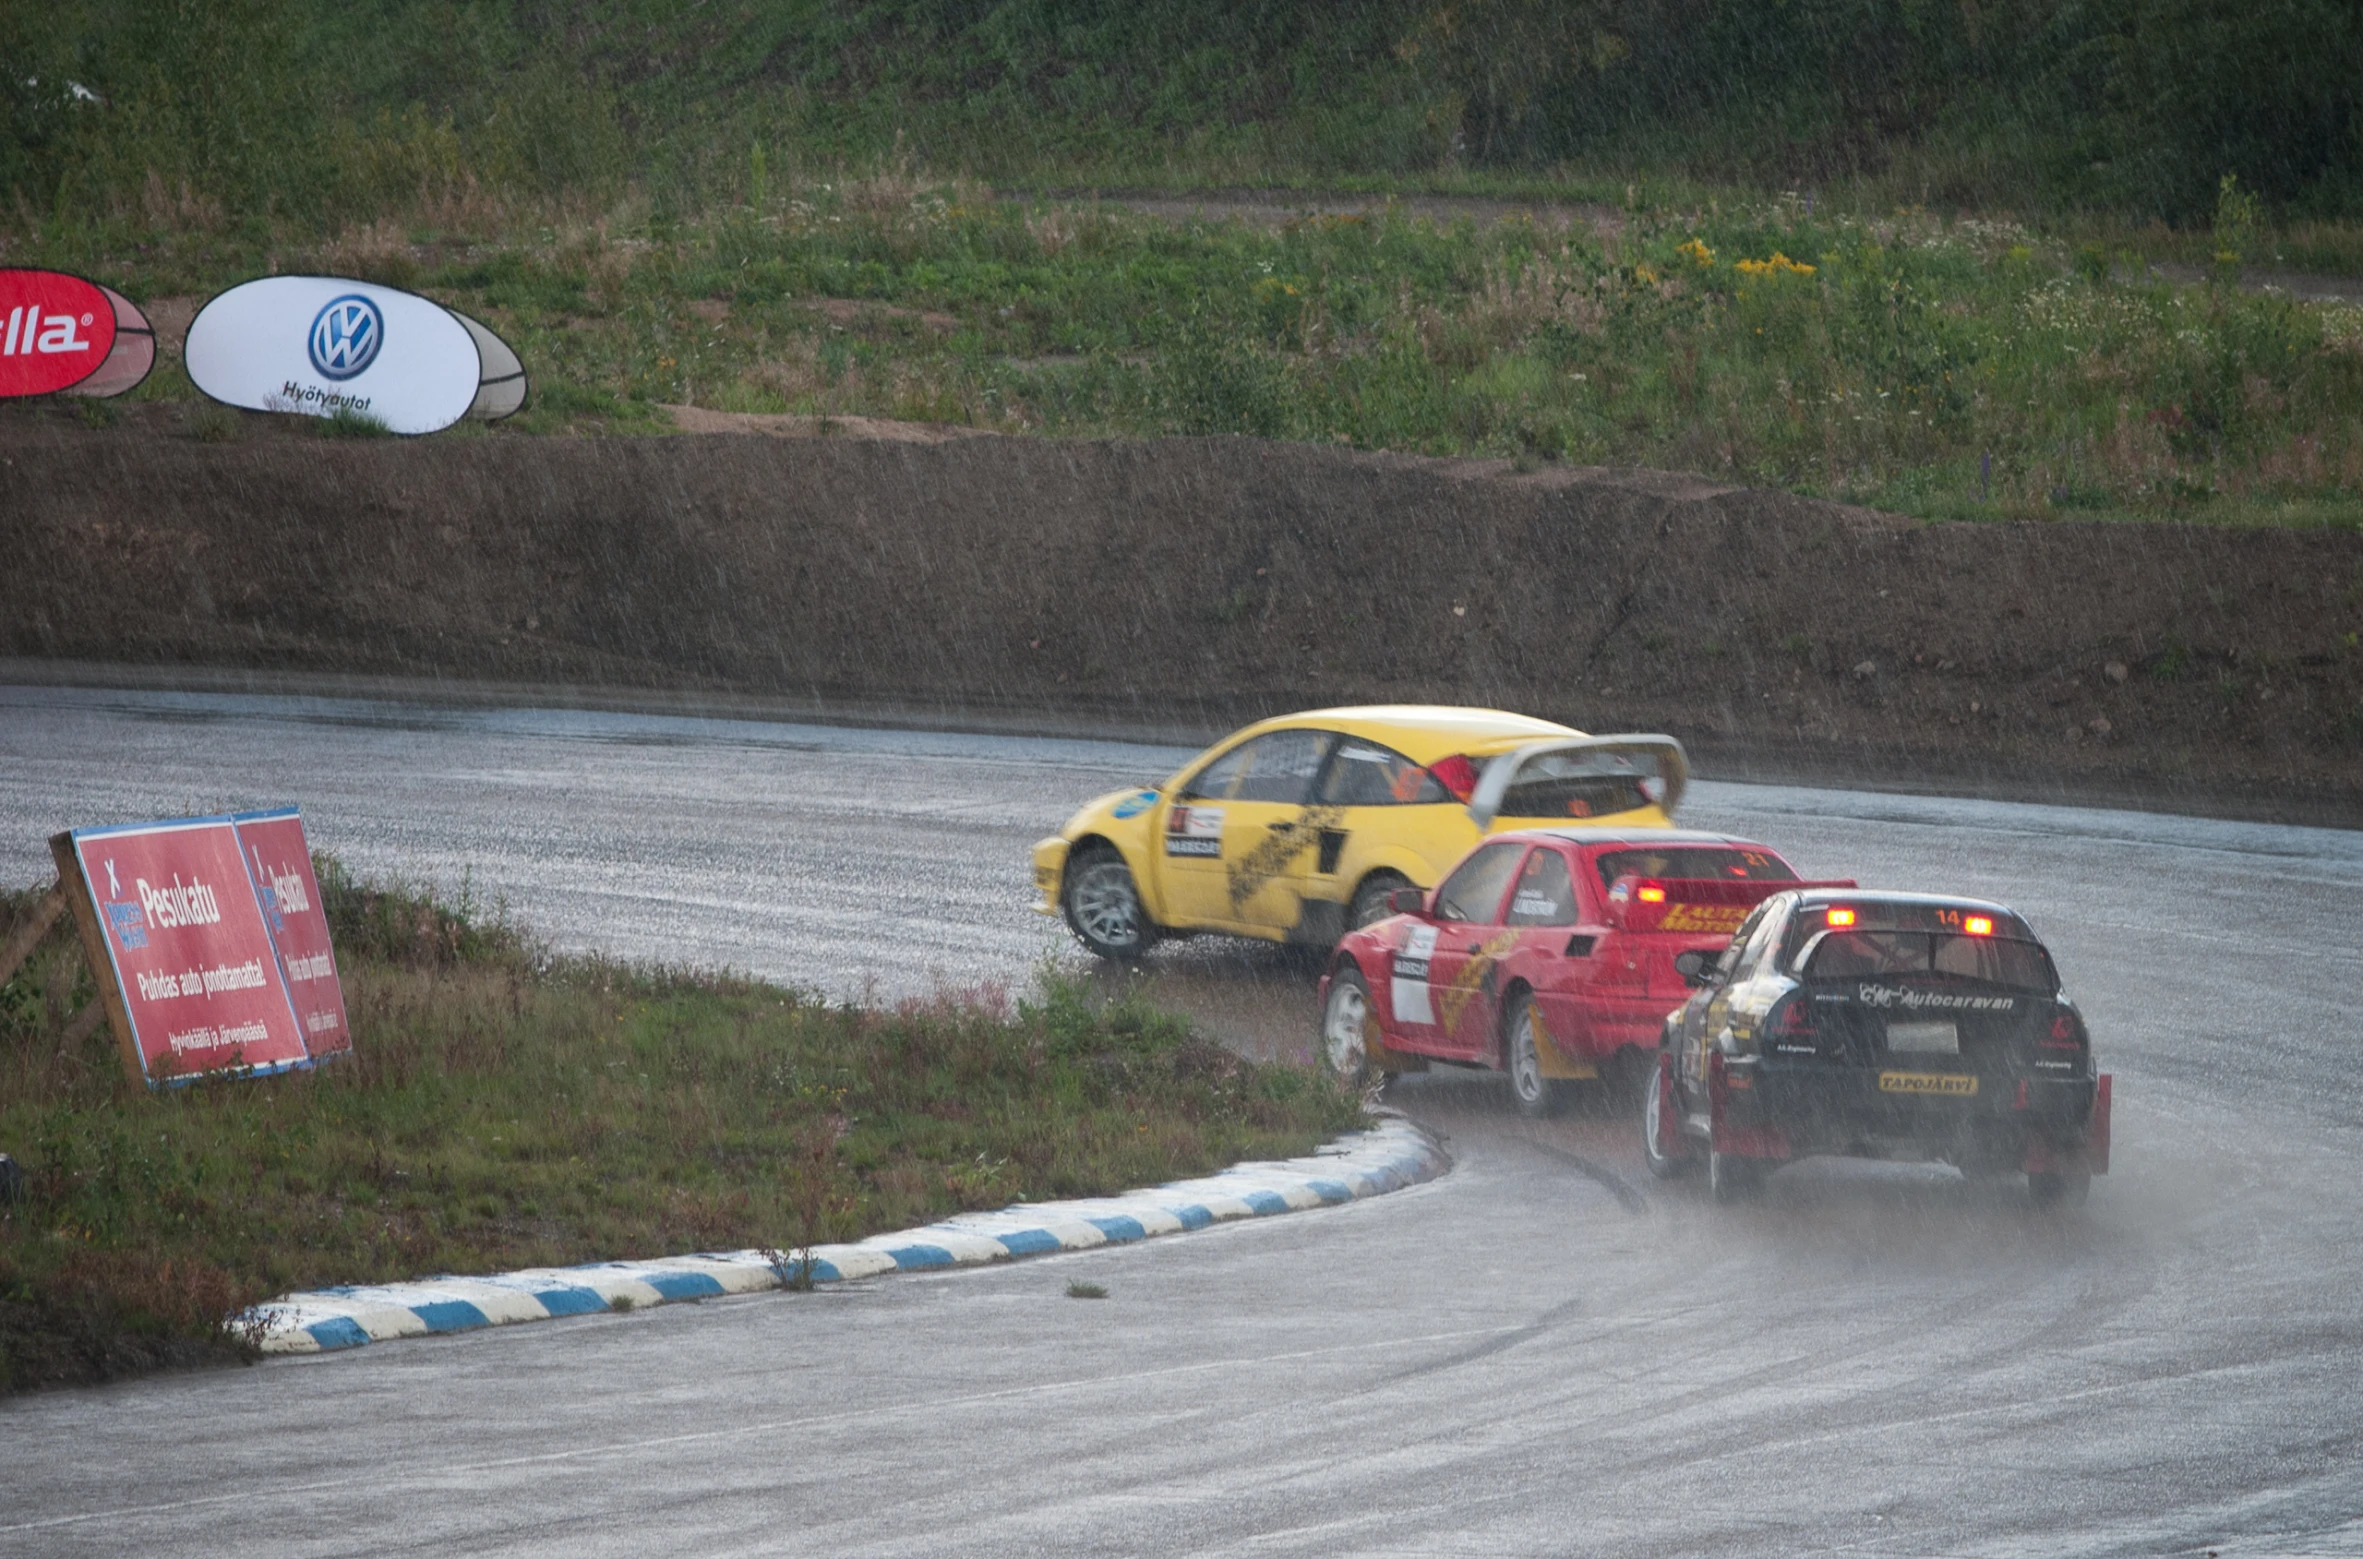 two cars going around a turn on the track during a race